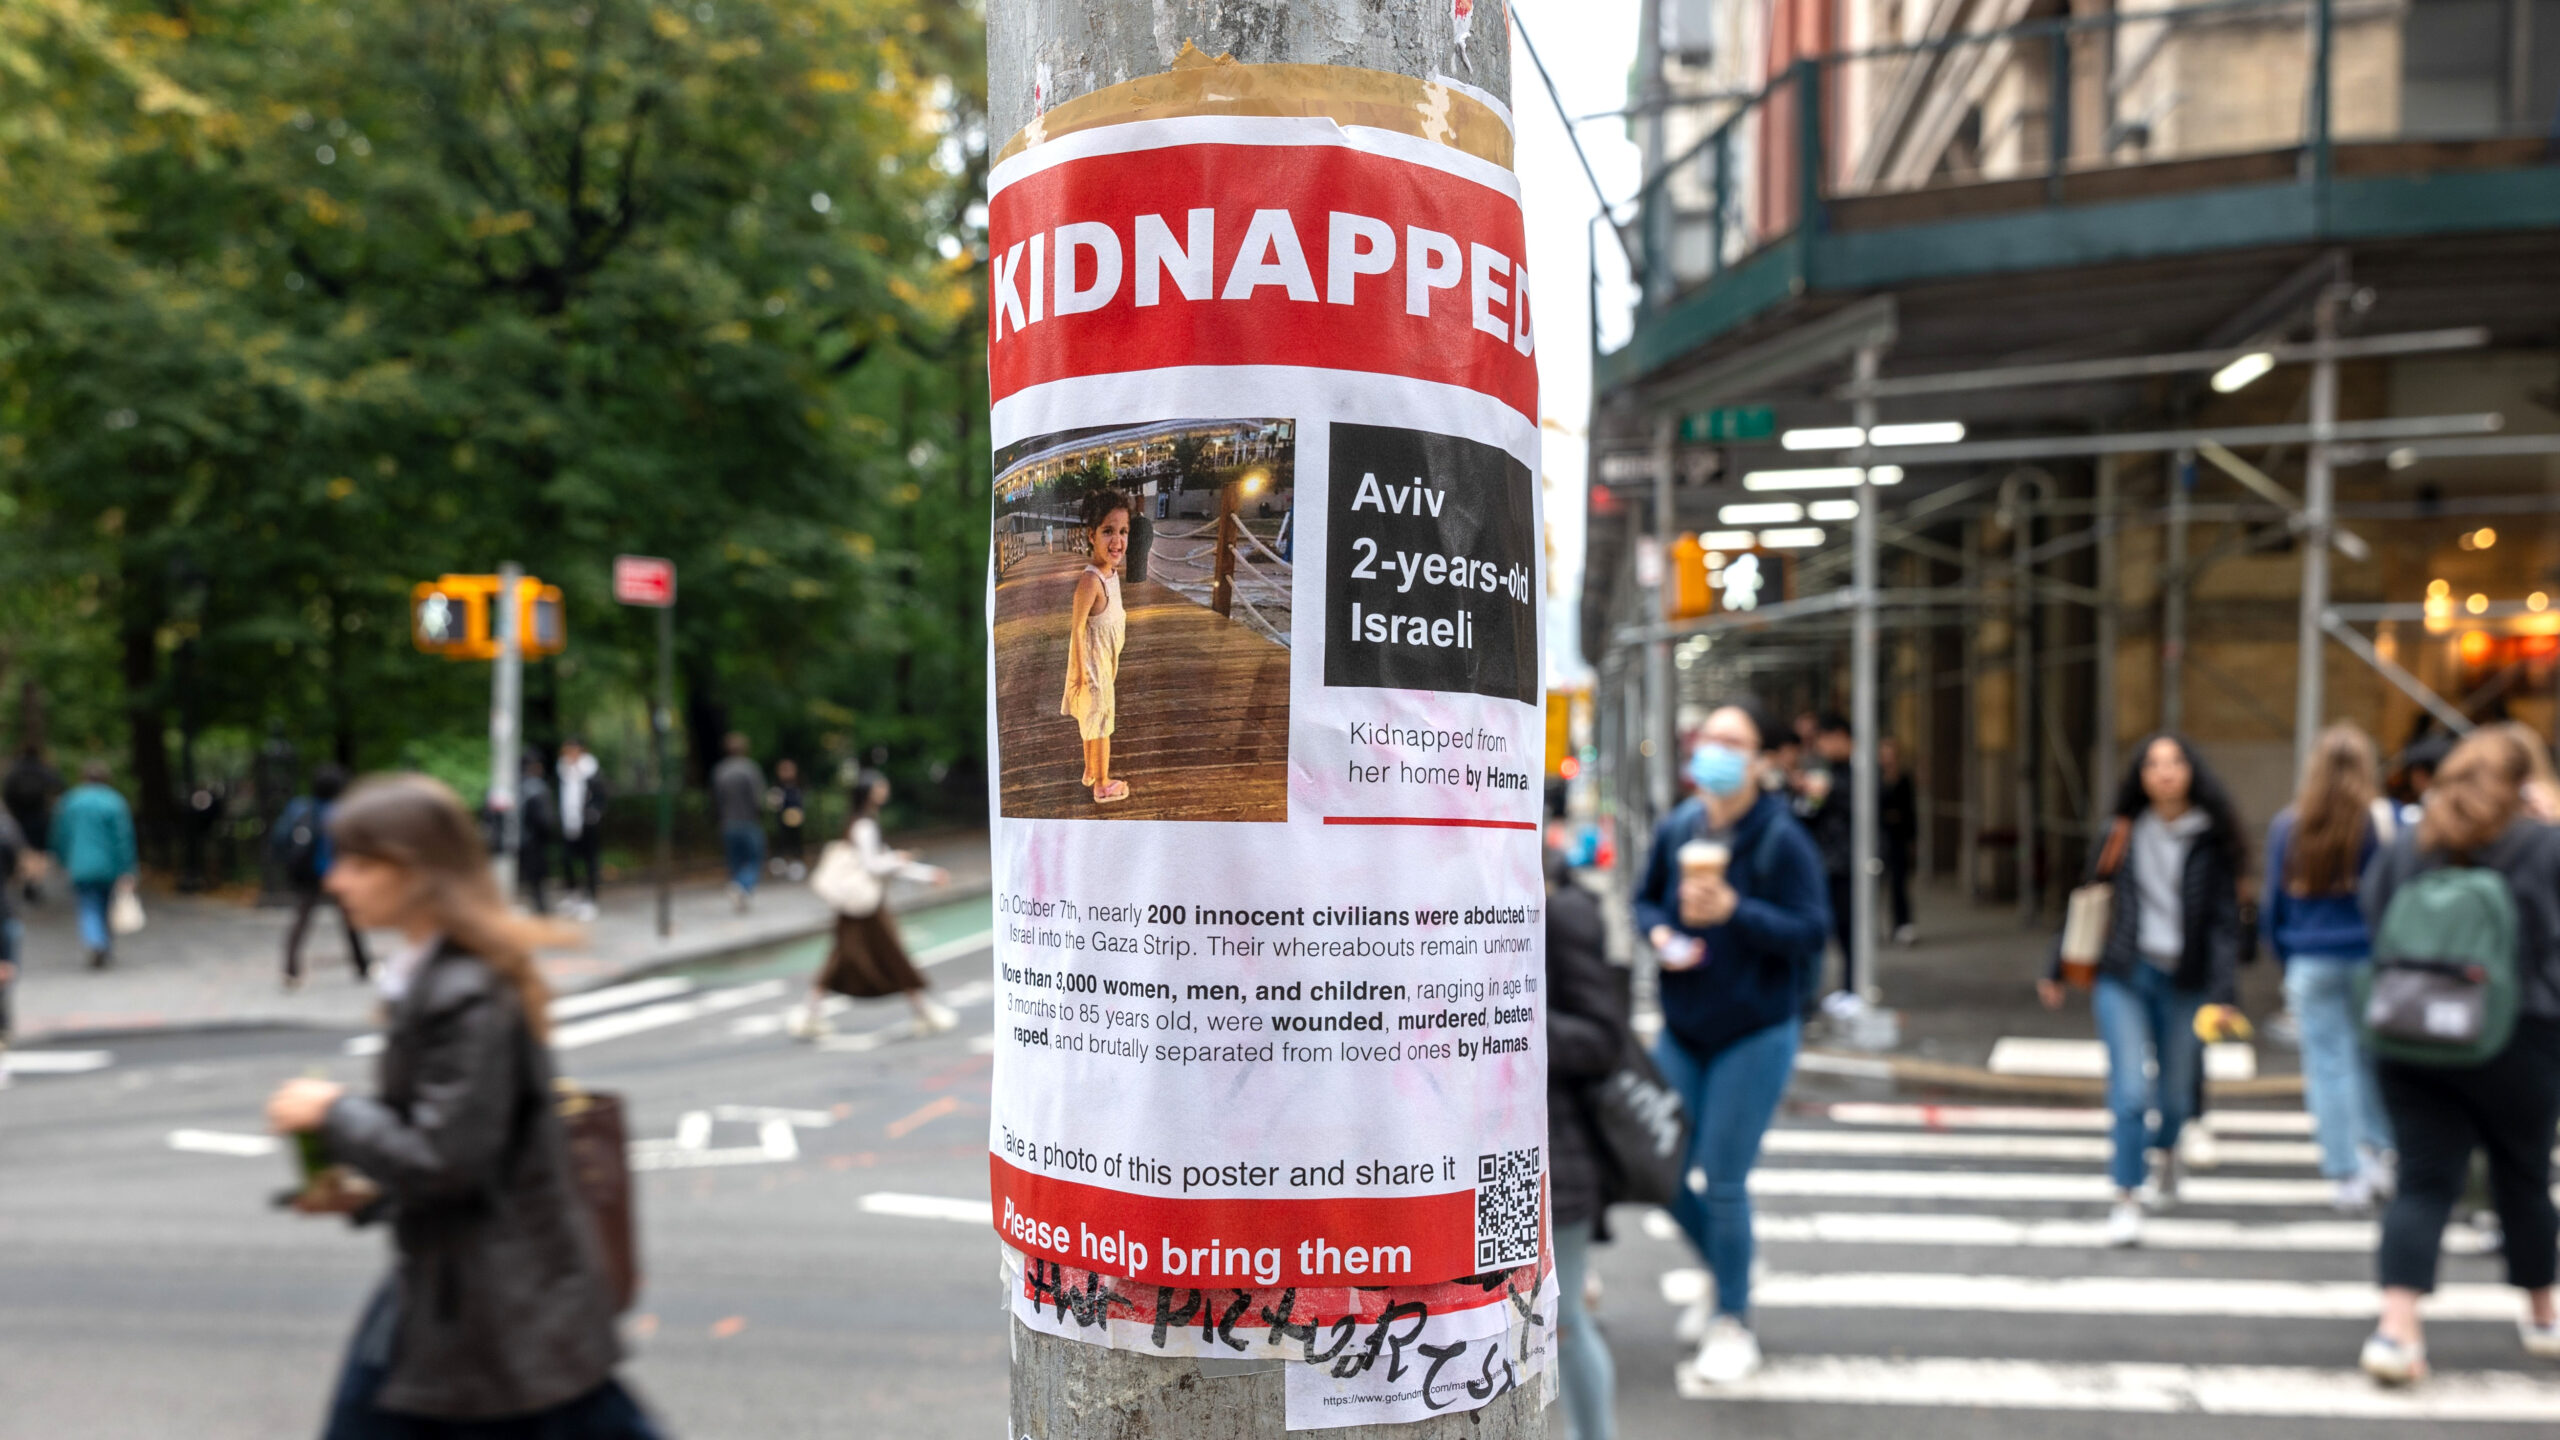 Man who confronted man tearing down ‘kidnapped’ posters in NYC says he’s not a superstar.